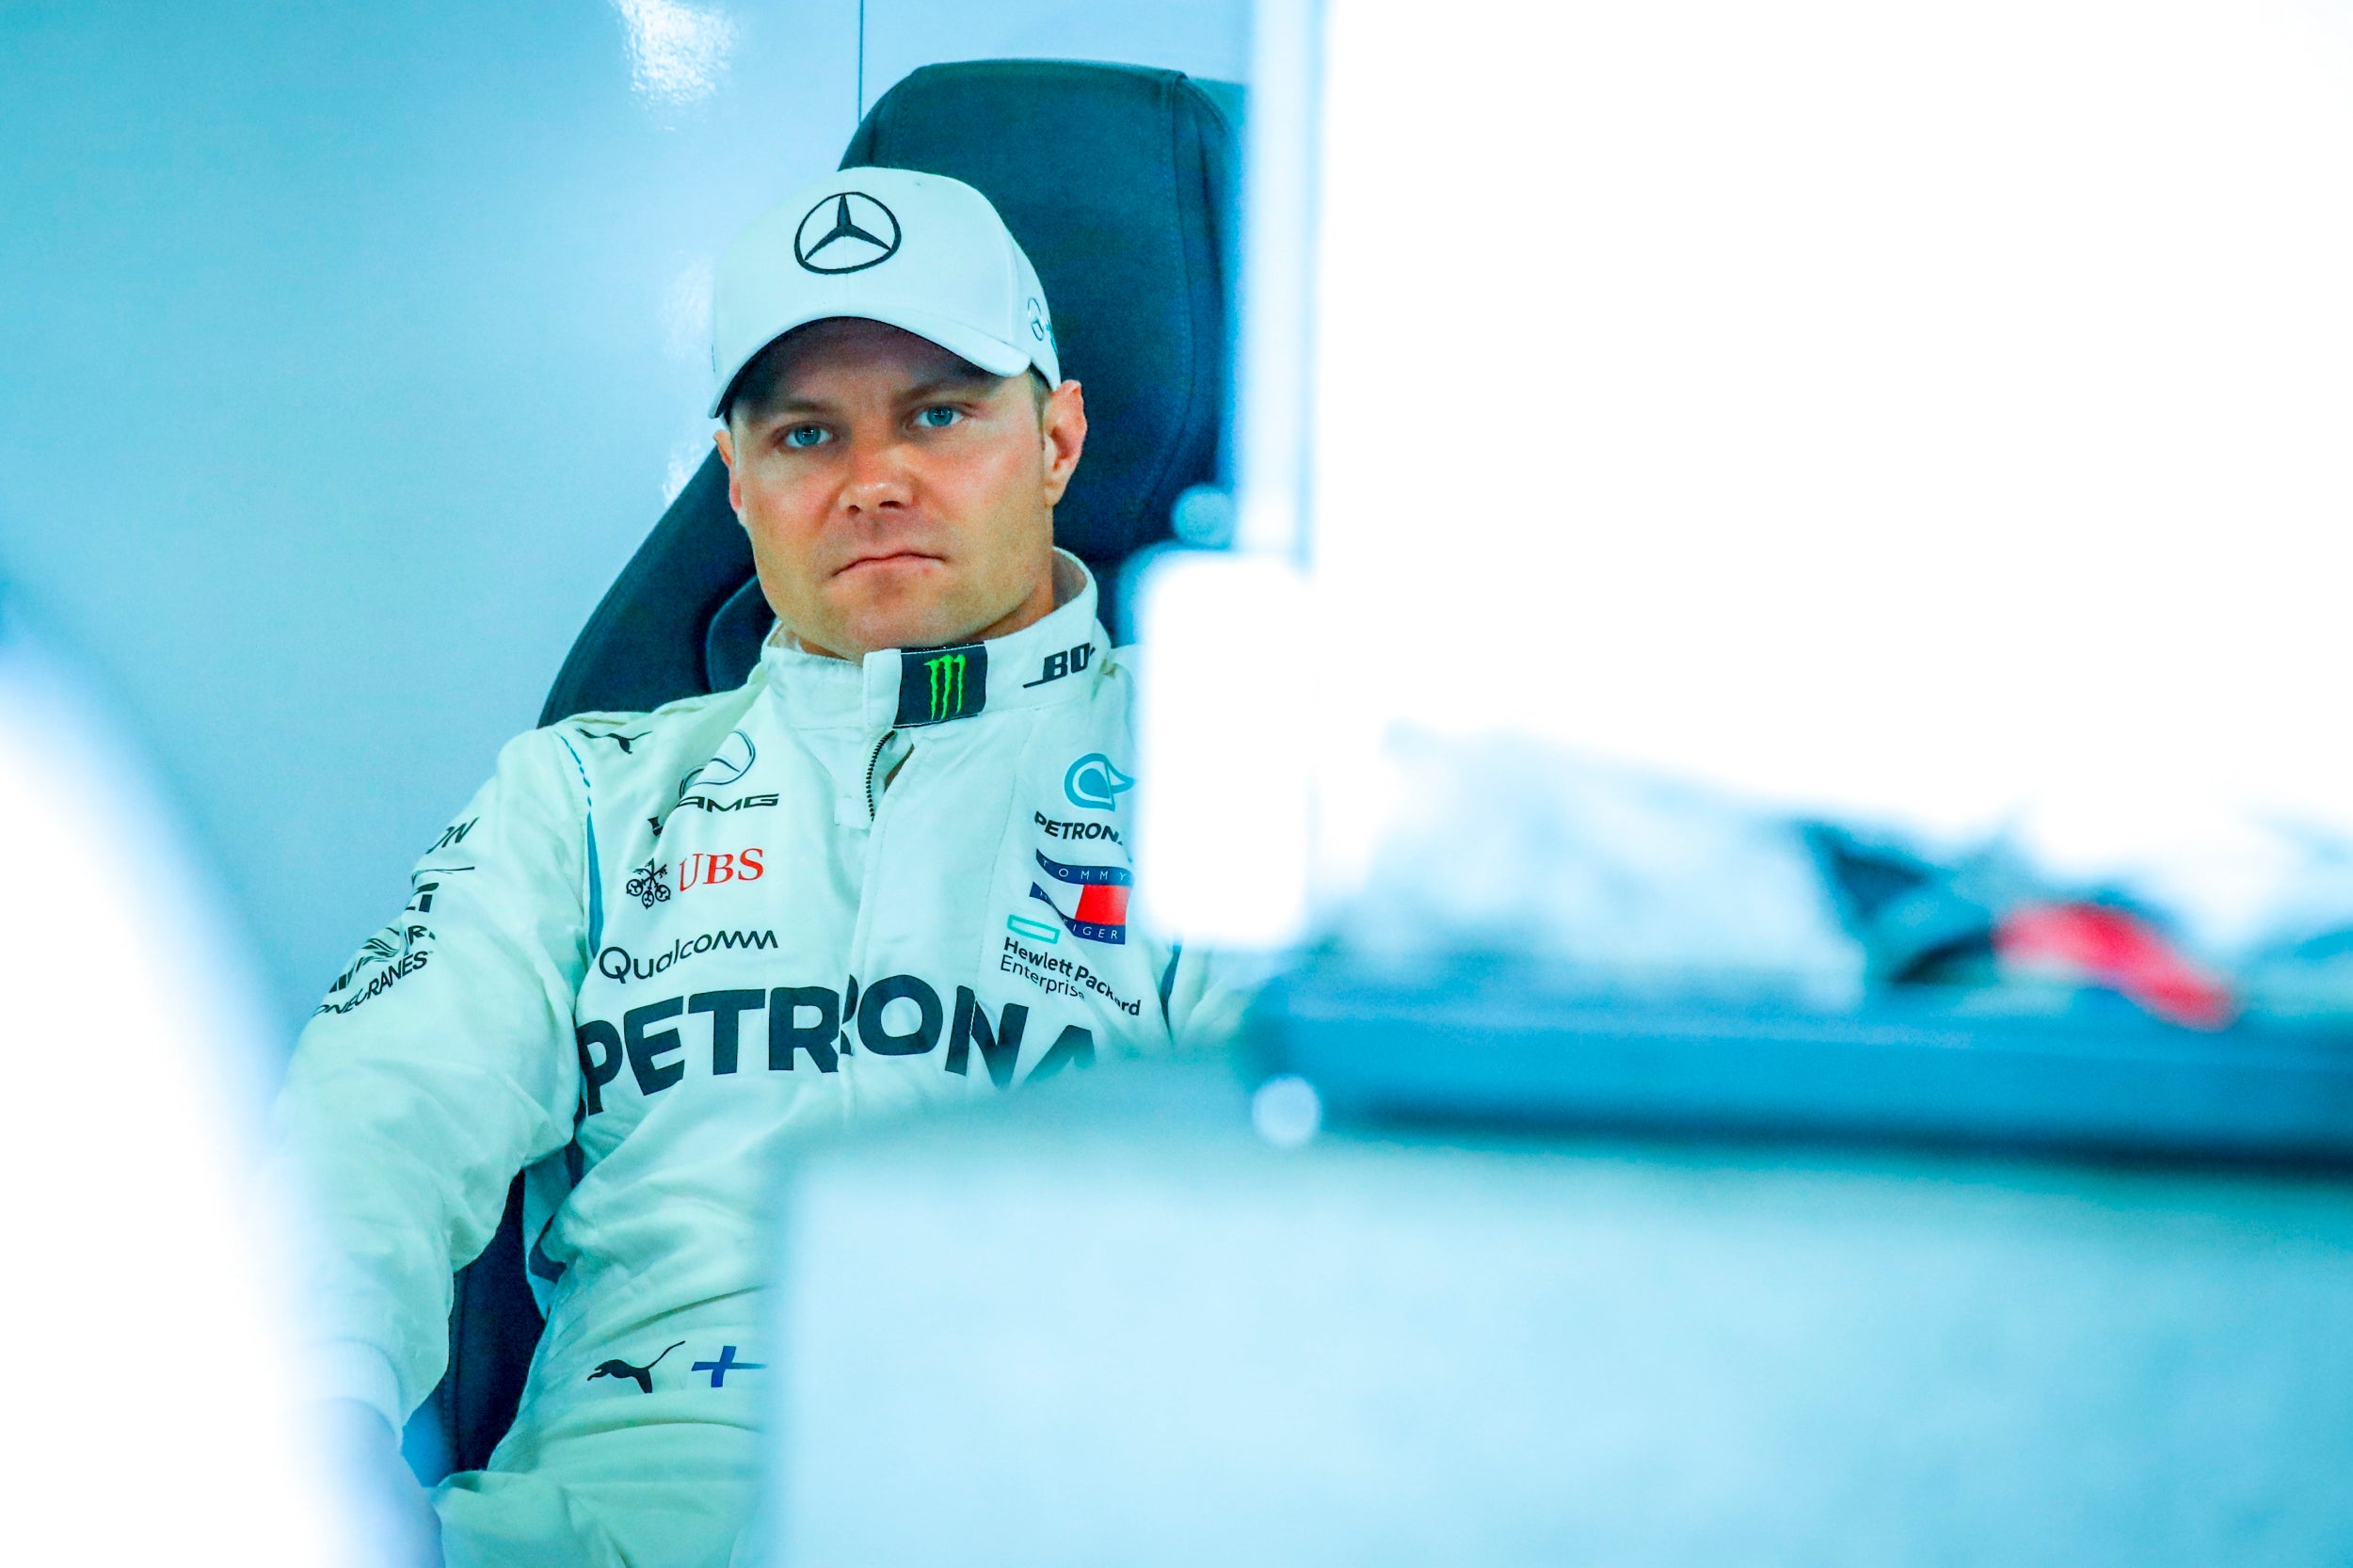 Bottas could not get close to Hamilton's time on Friday